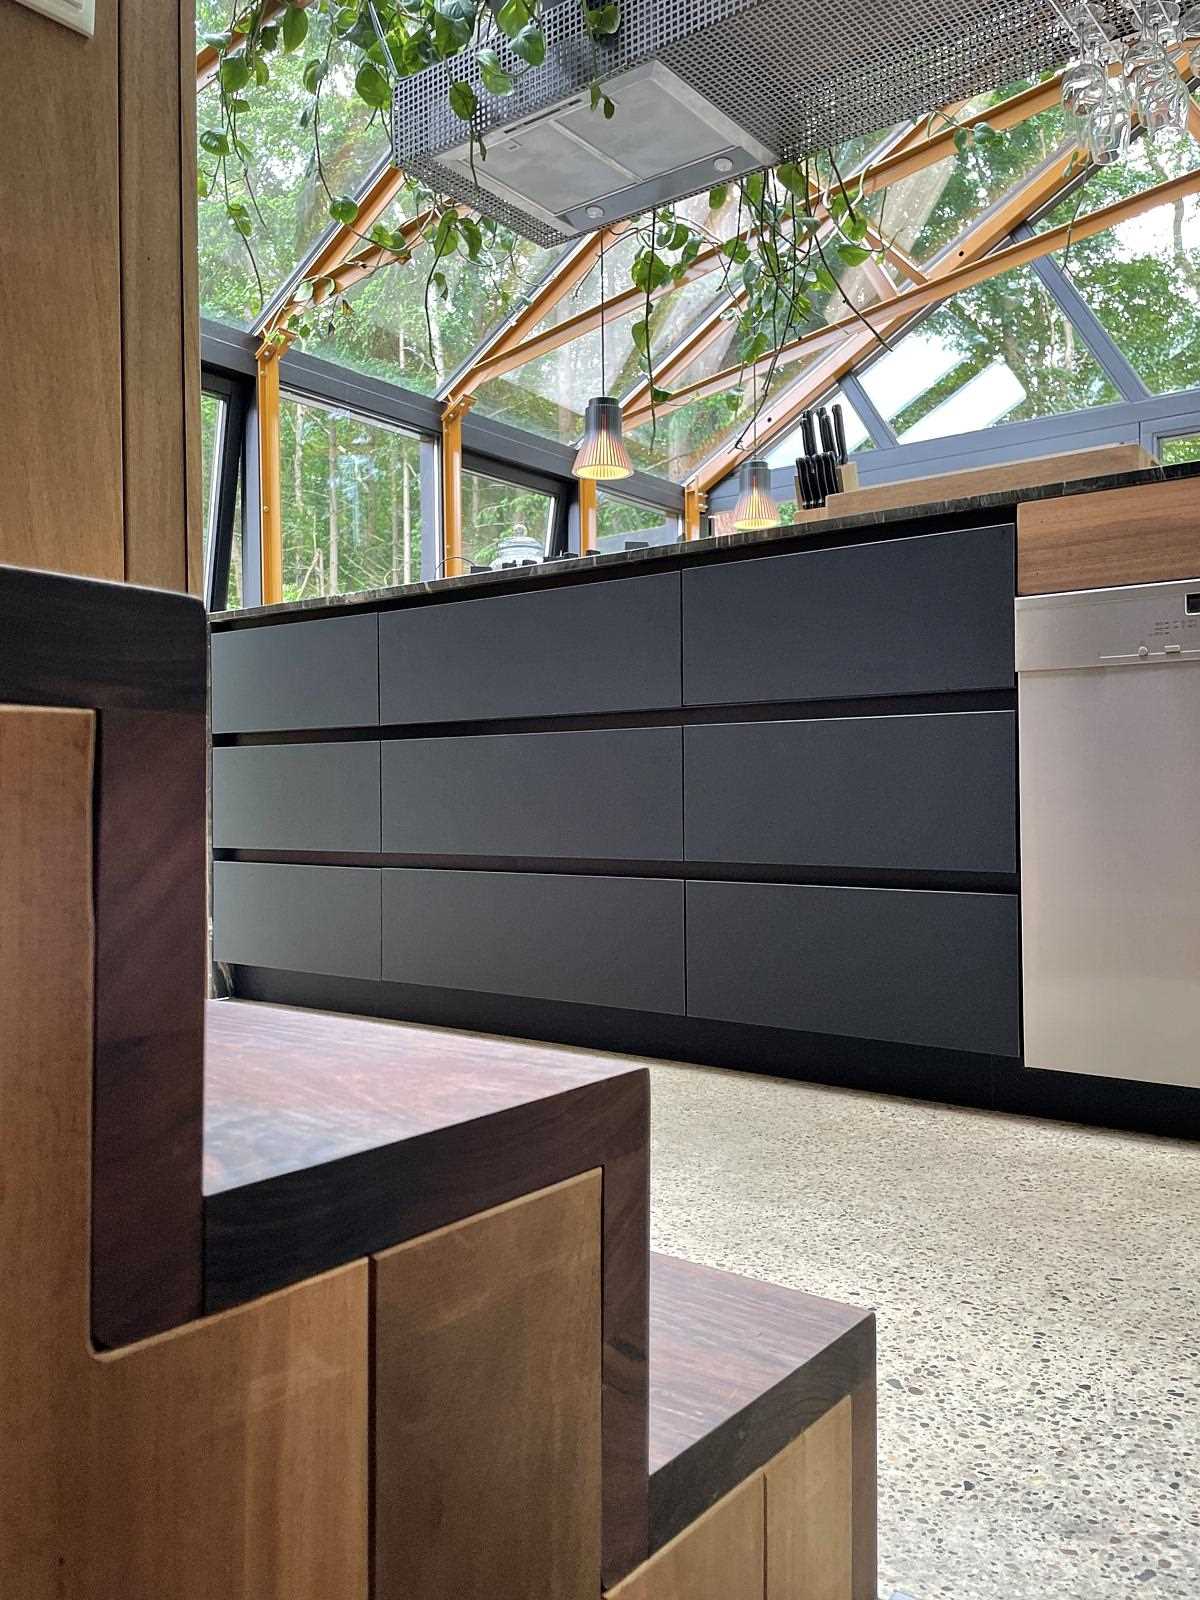 A modern kitchen with black cabinets and wood stairs.